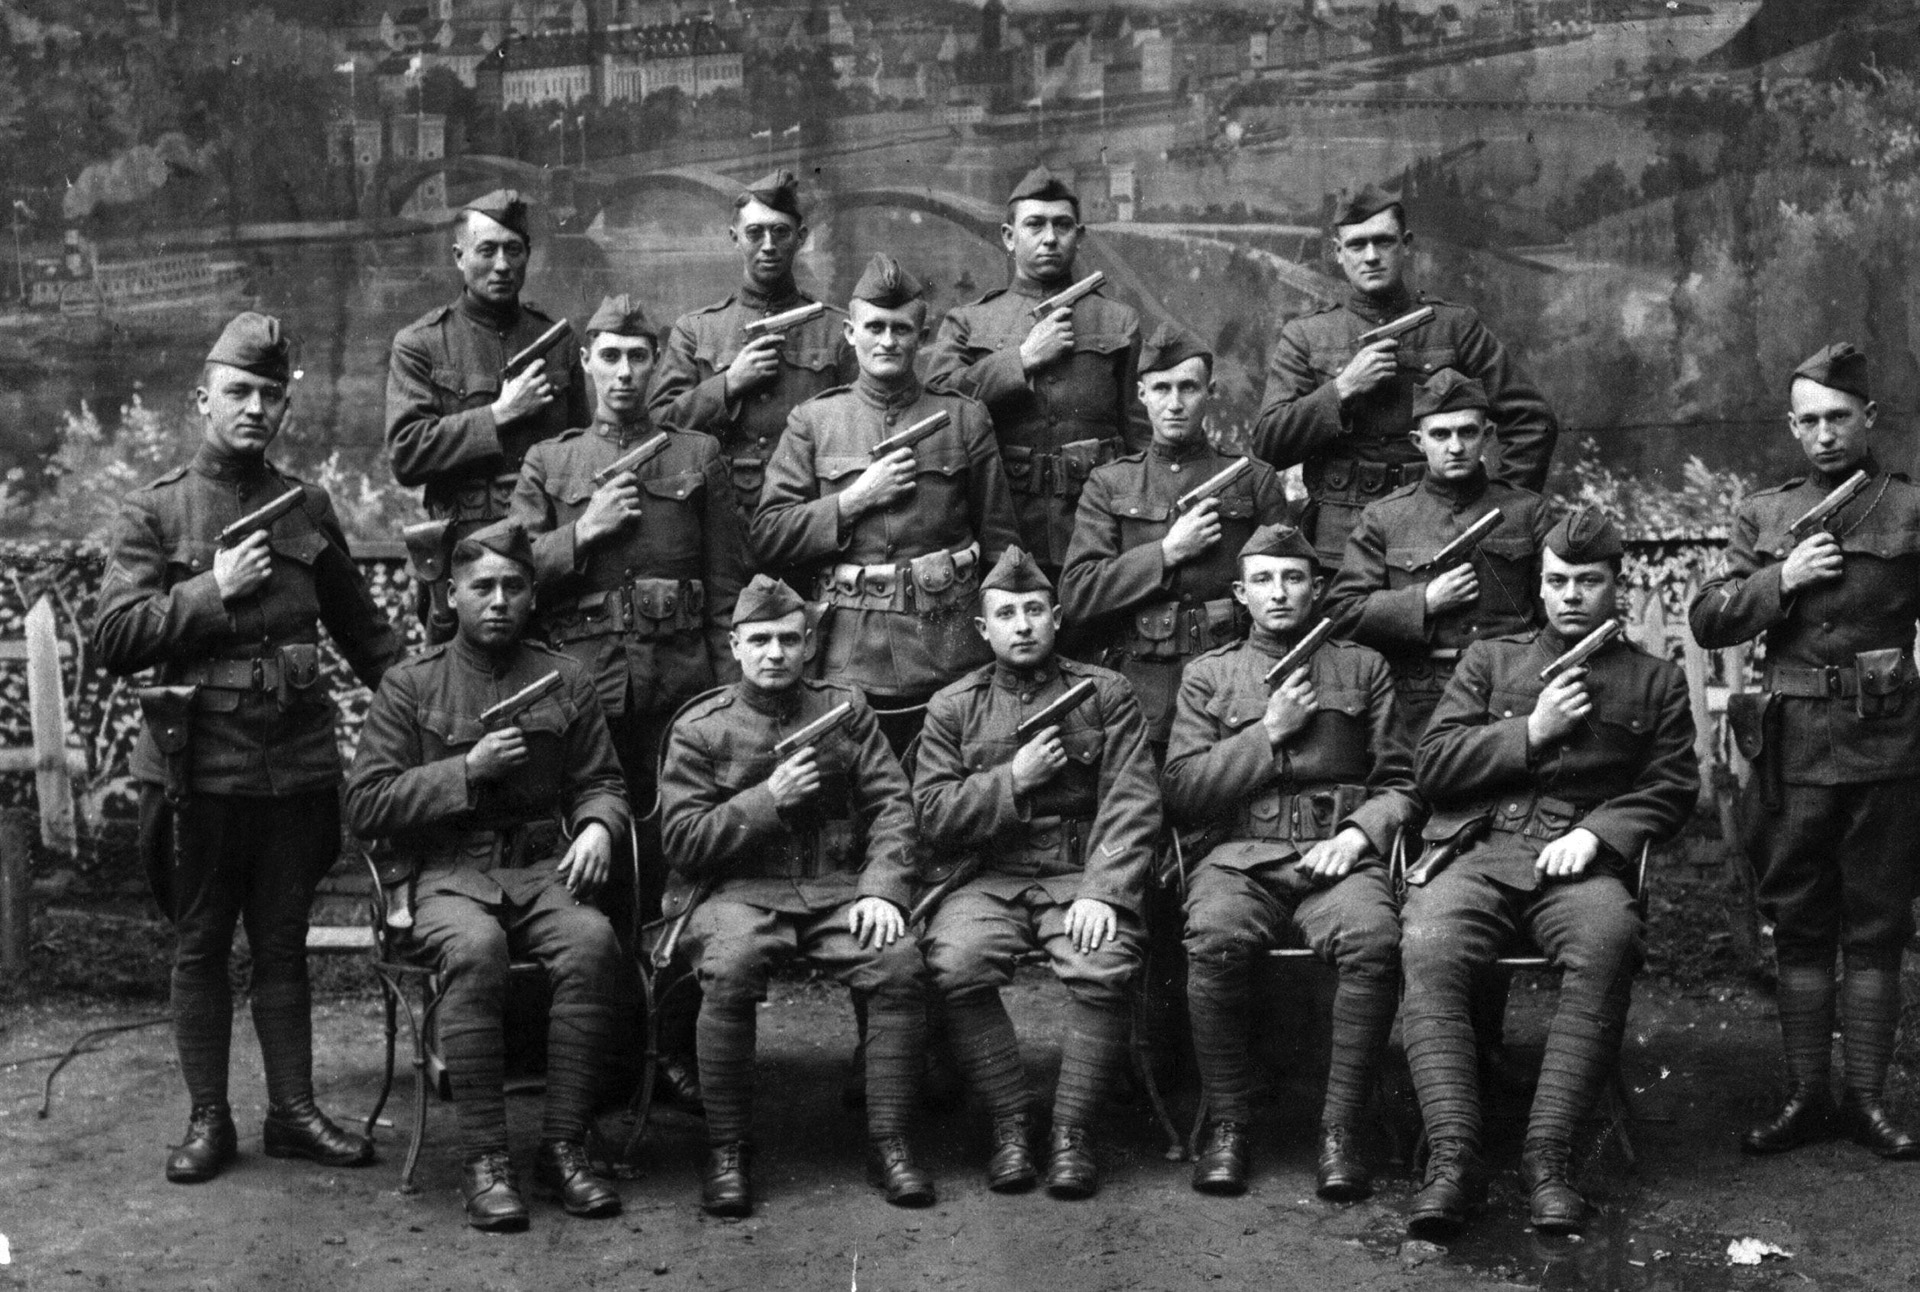 U.S. Army soldiers proudly display their Colt M1911 pistols as they prepare to go into action in France in 1917. 